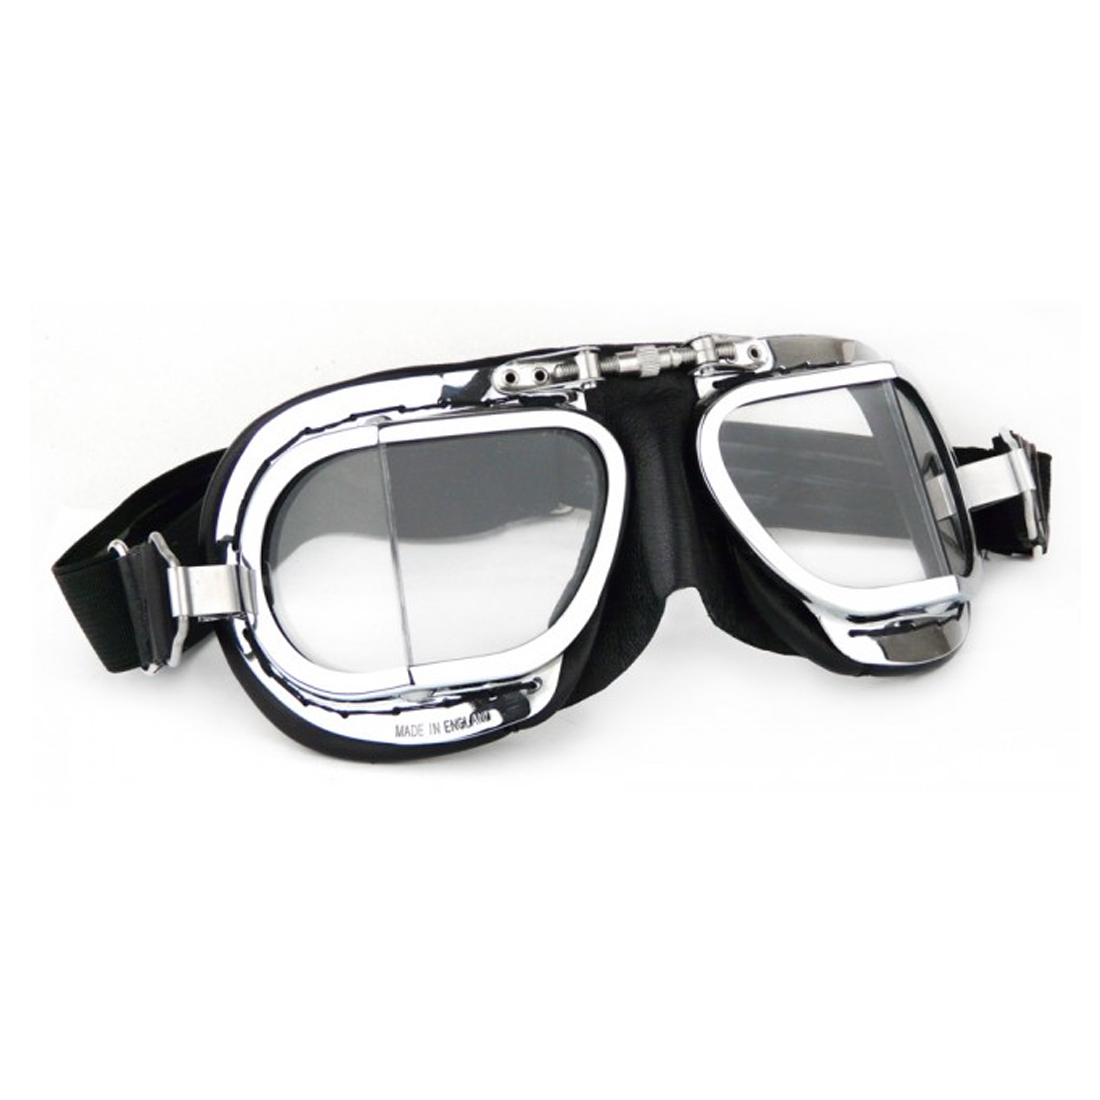 Halcyon Motorcycle Goggles Compact Chrome and Black